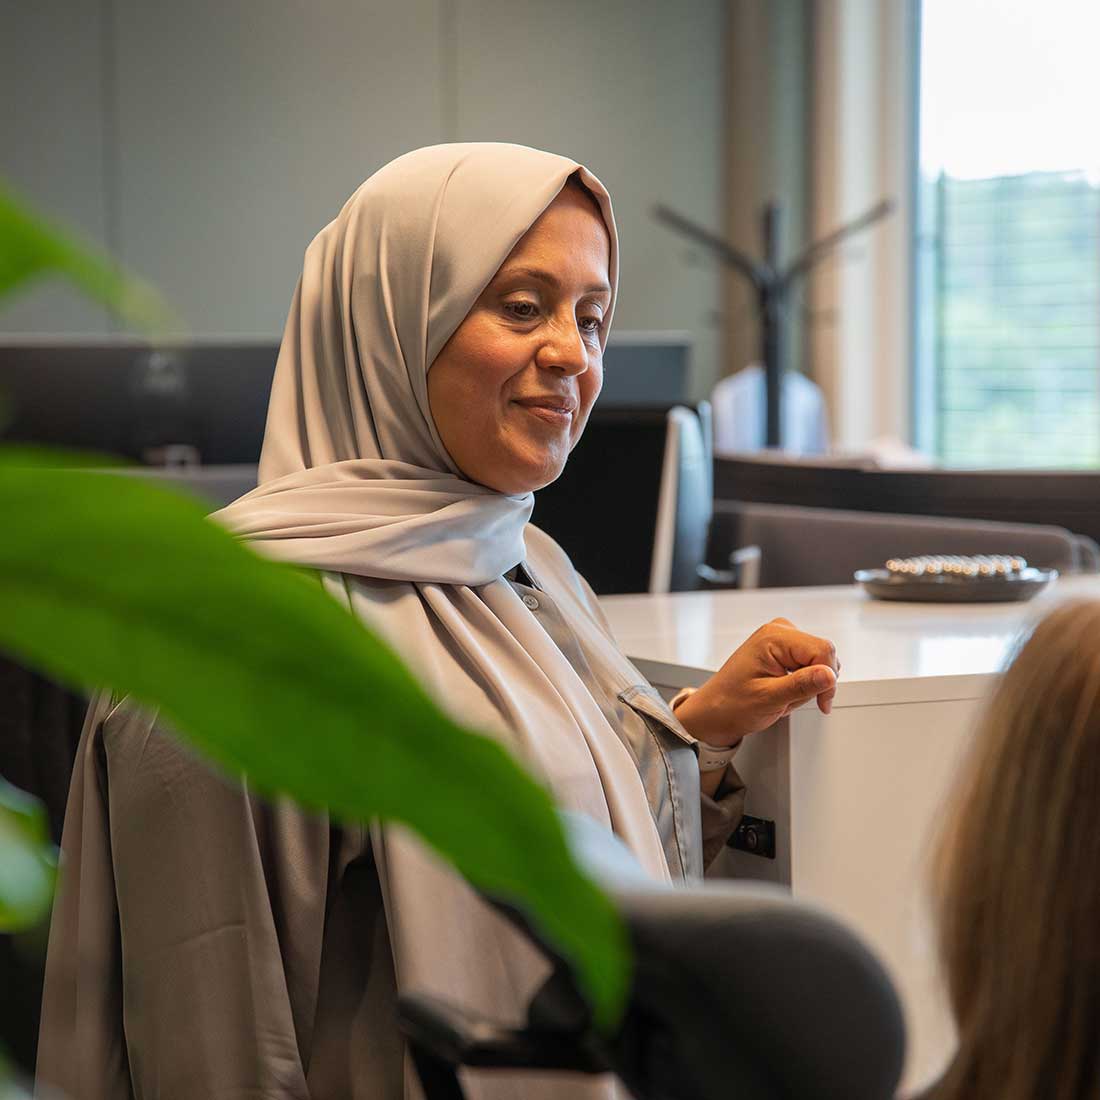 Muslim woman wearing a hijab in conversation with a colleague in an open office